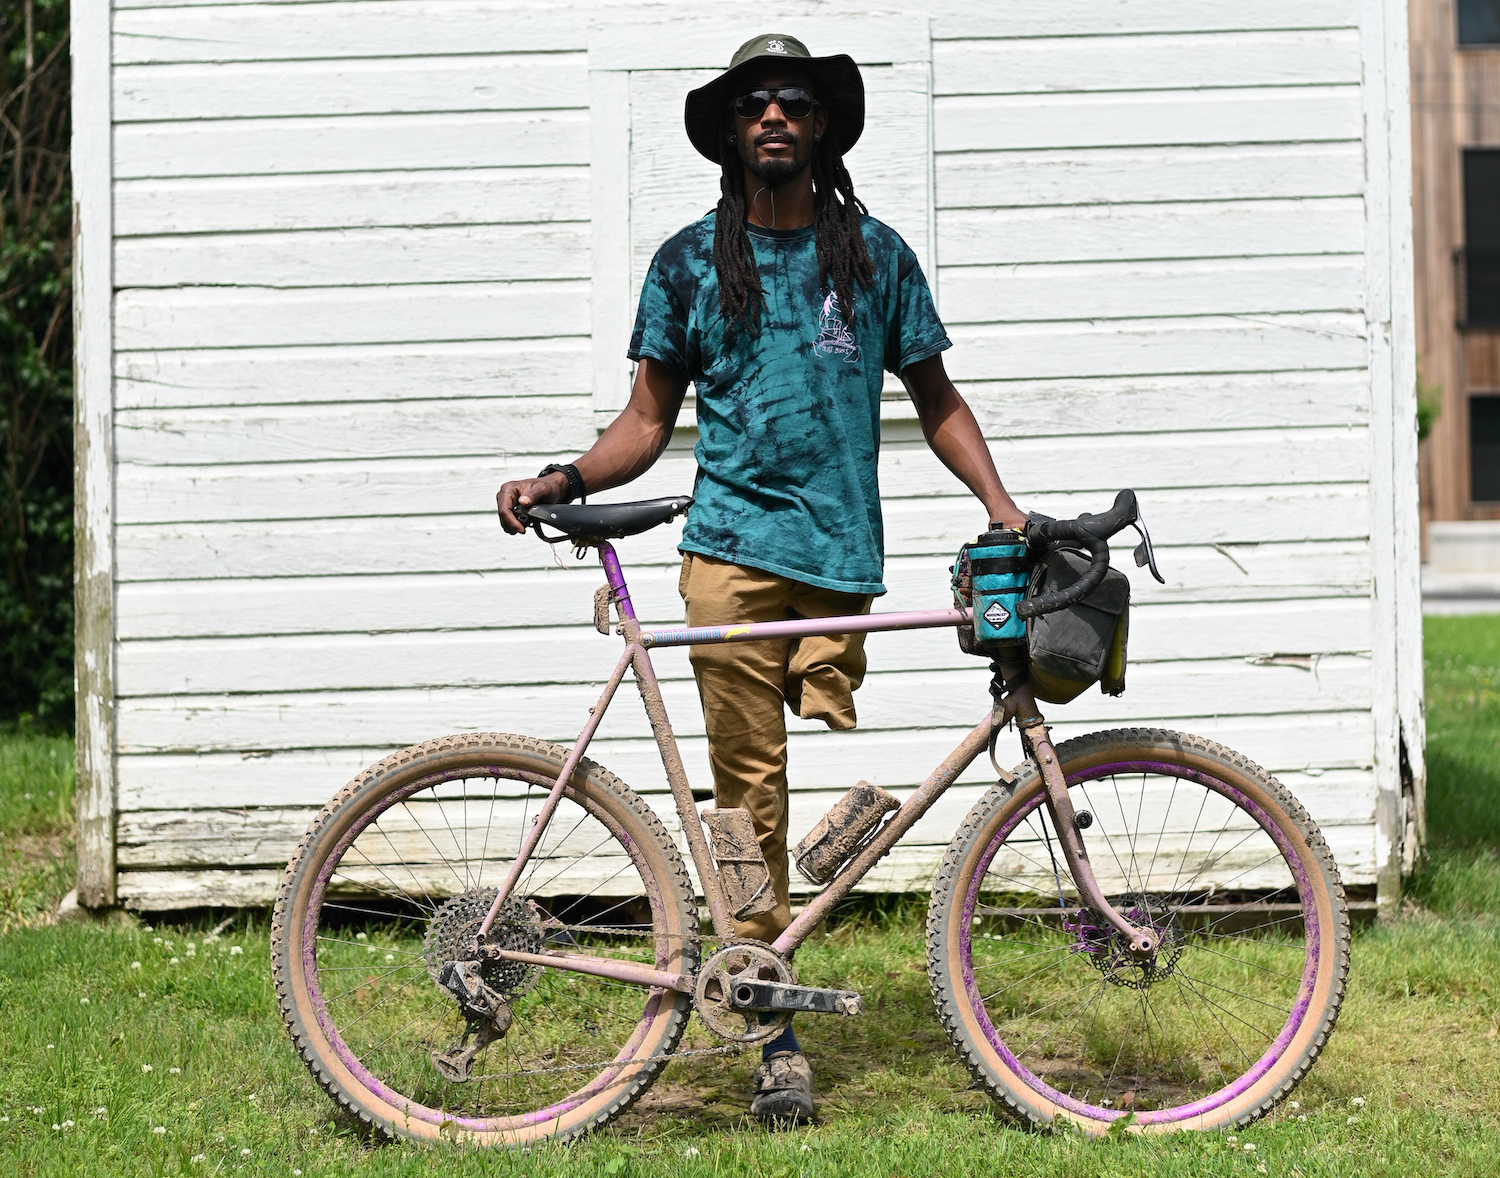 Leo Rogers, a black man with one leg, stands suavely with his bike against a white shed